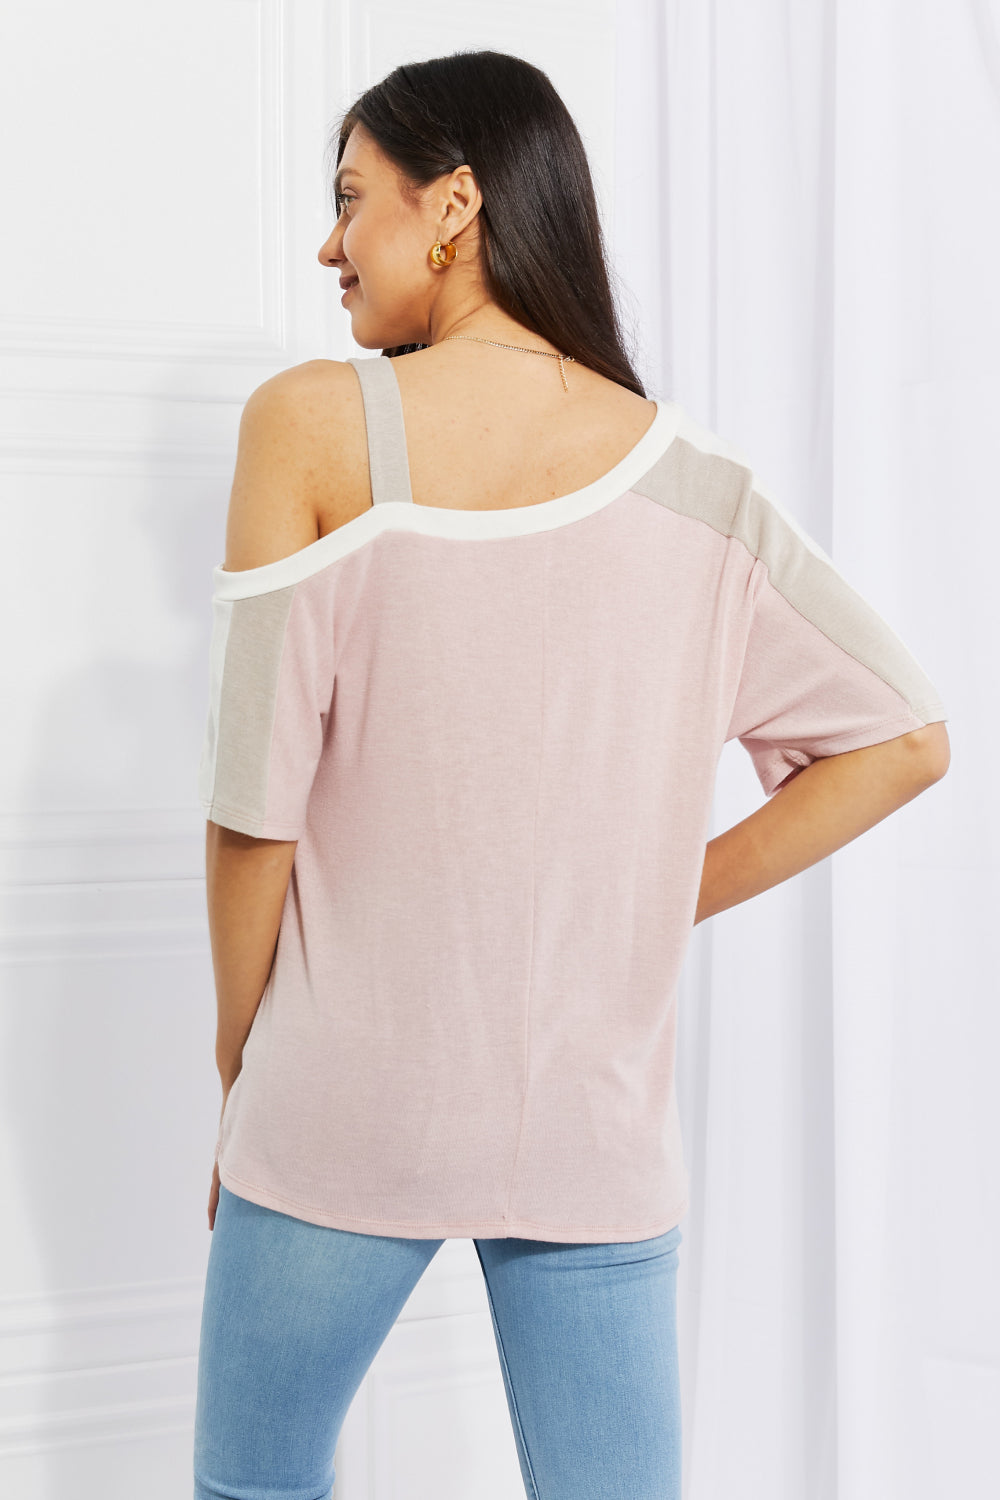 Light Gray Andree by Unit Full Size Something Simple Cold Shoulder Tee Sentient Beauty Fashions Apparel & Accessories